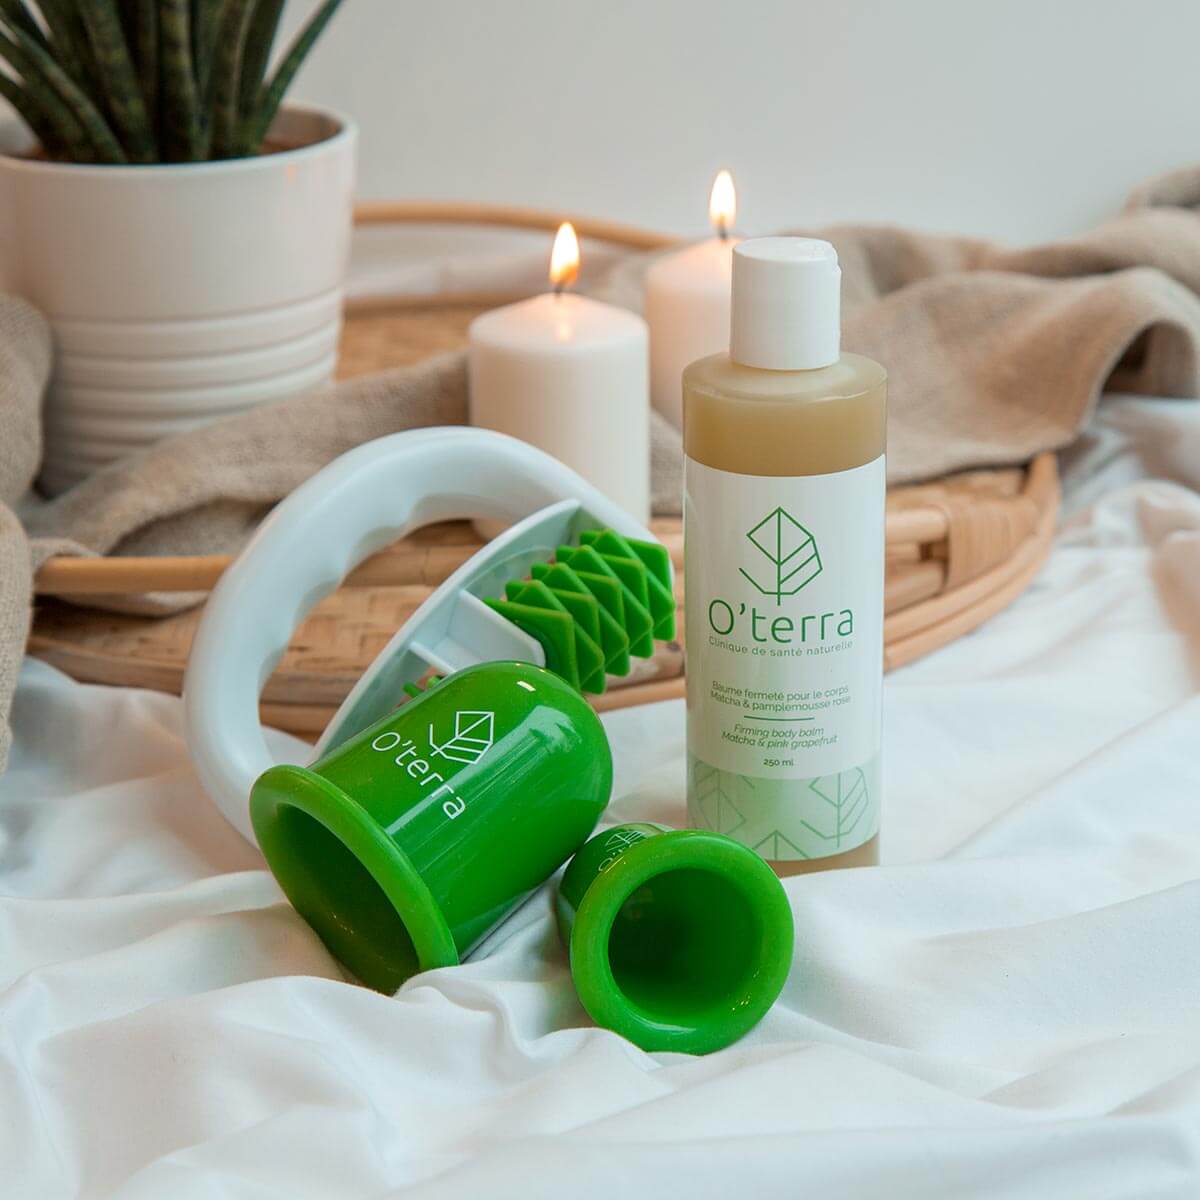 O'terra Roulette, body suction cups and matcha & pink grapefruit balm Trio